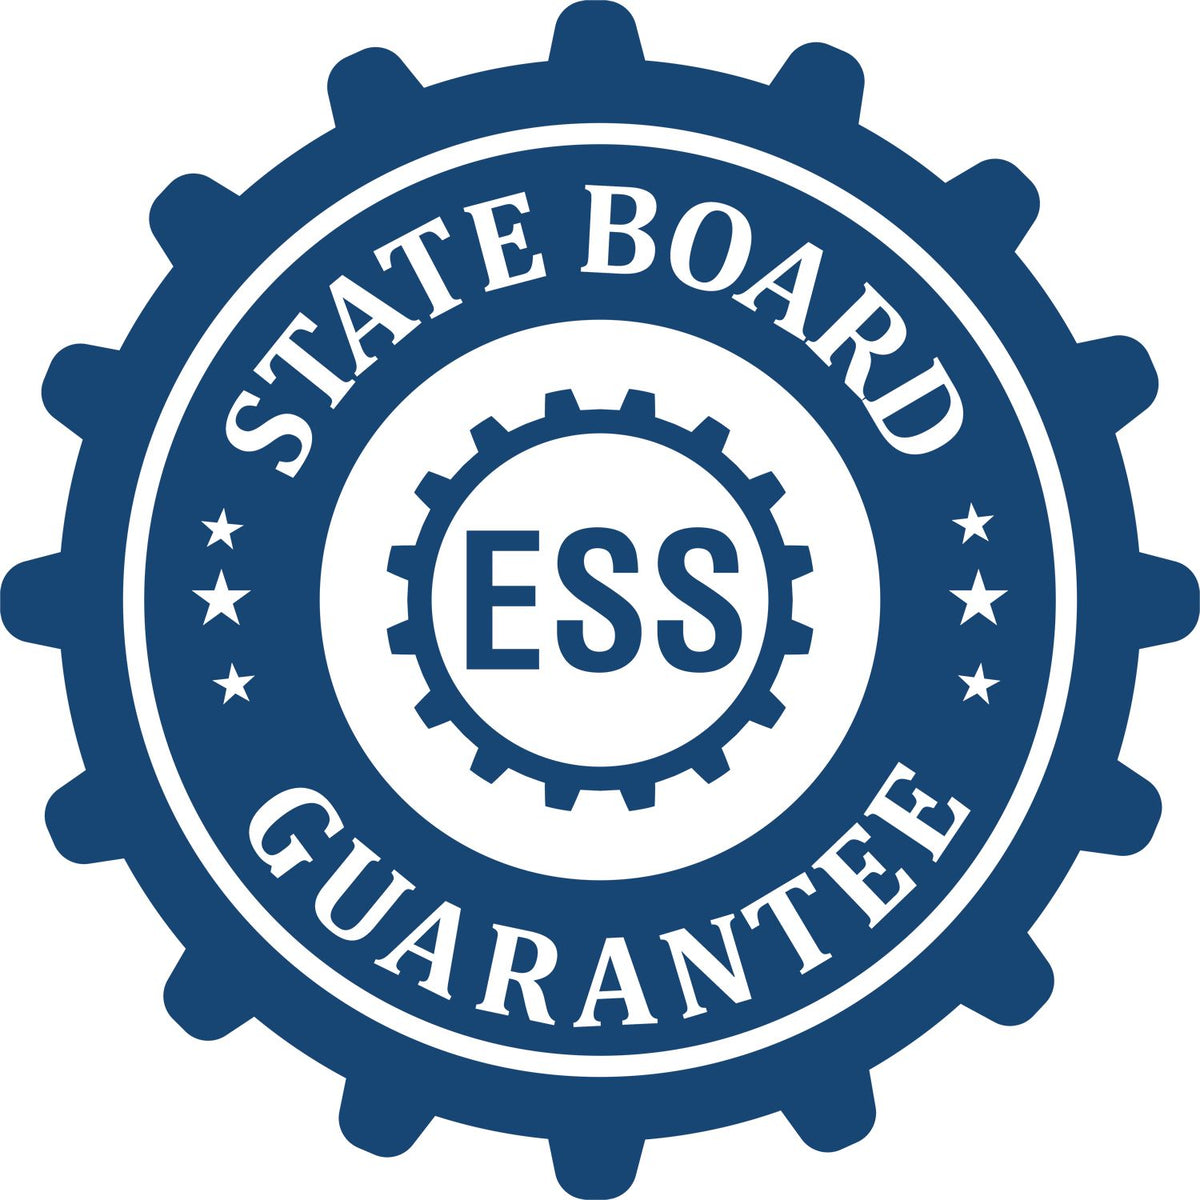 An emblem in a gear shape illustrating a state board guarantee for the State of Missouri Extended Long Reach Engineer Seal product.